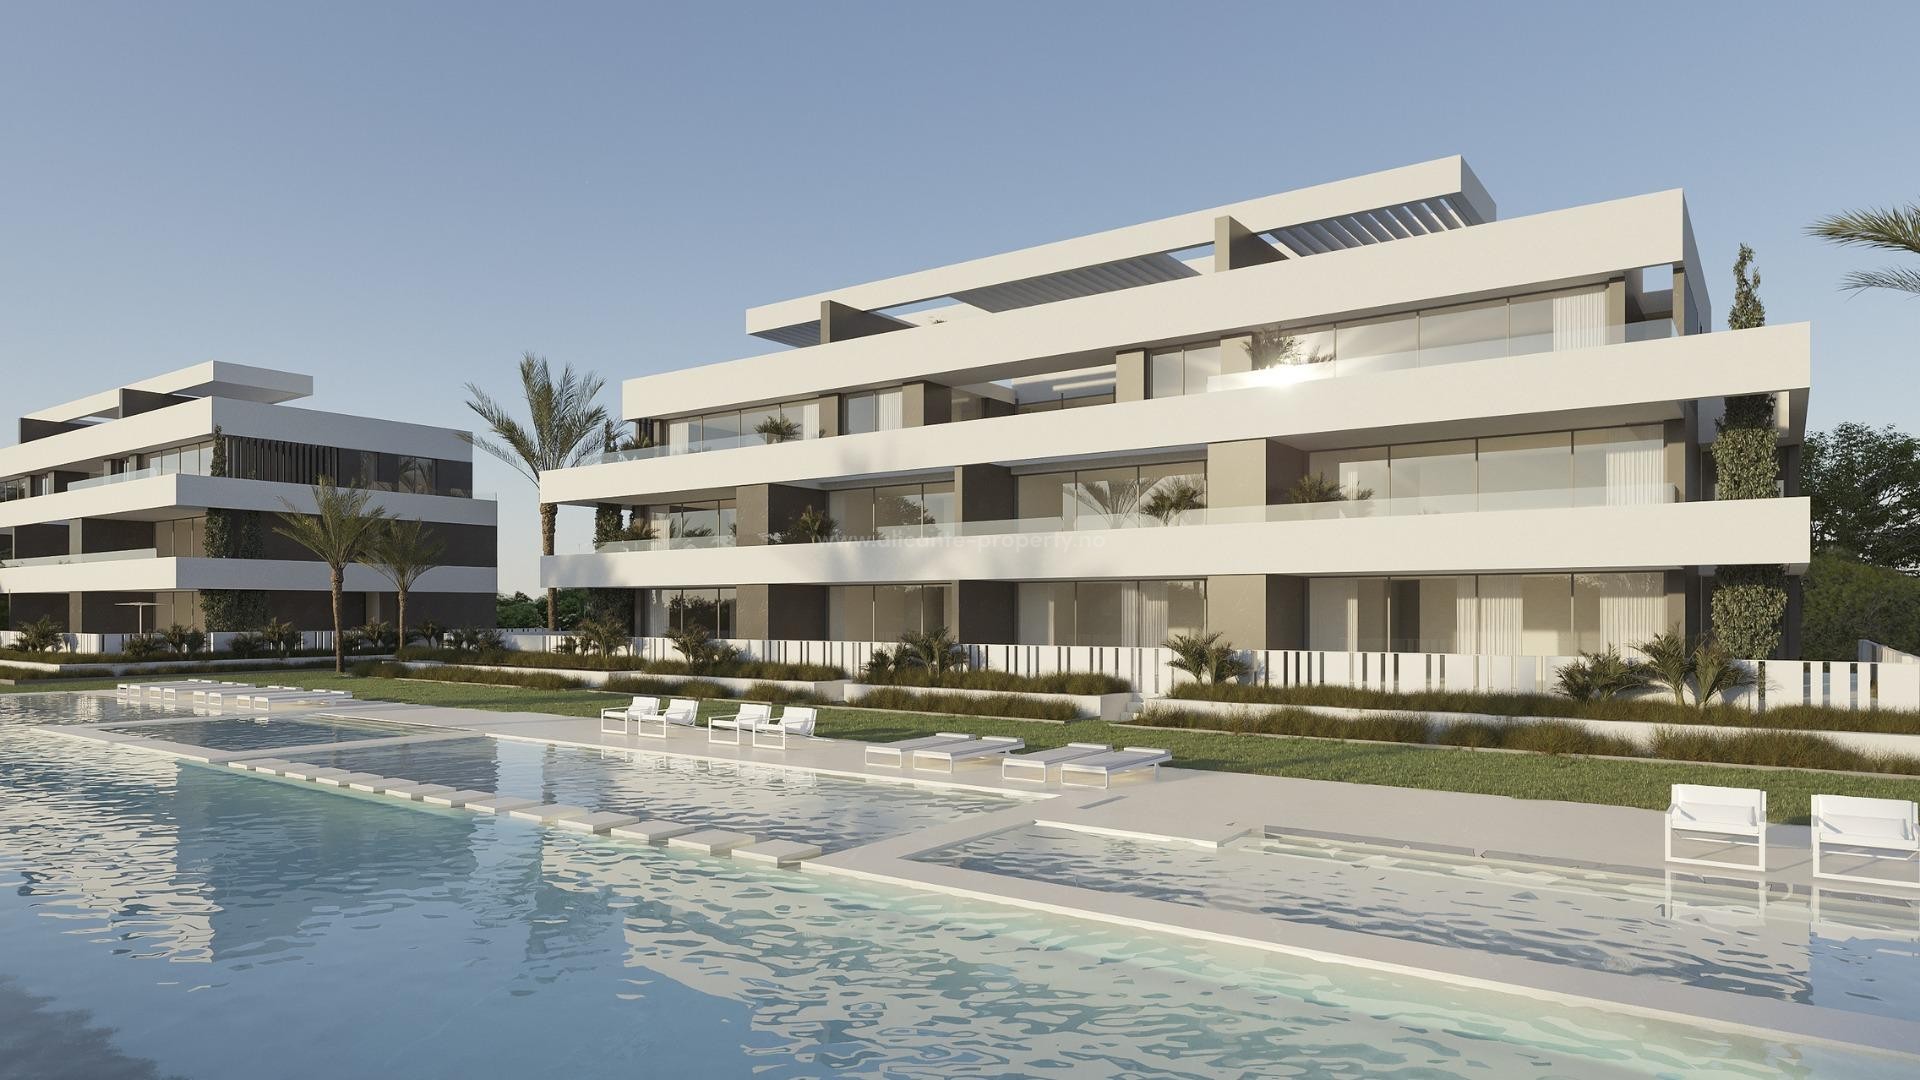 2/3 bedroom, 2 bathroom apartments and penthouses in La Nucia, terrace, outdoor pool, gym and shared spa with indoor heated pool